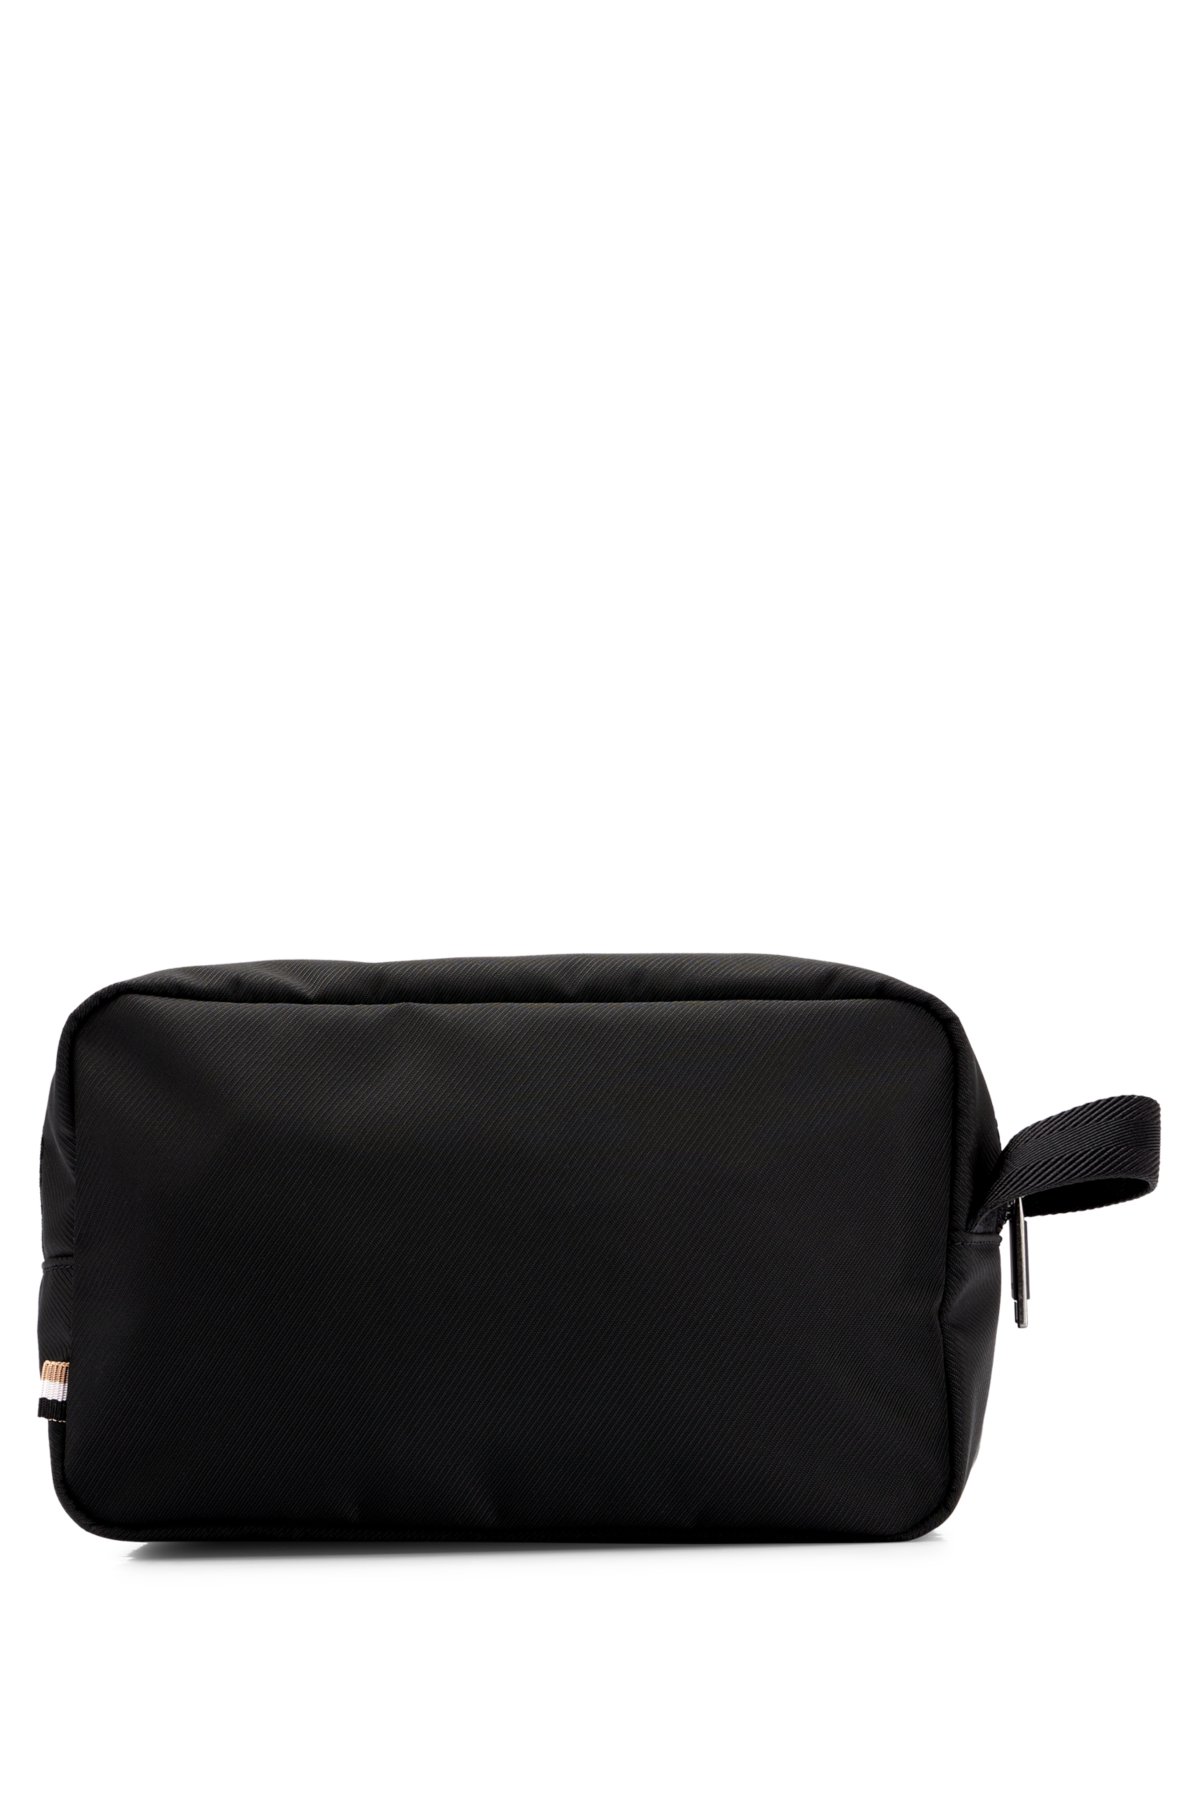 Logo washbag in structured recycled material, Black